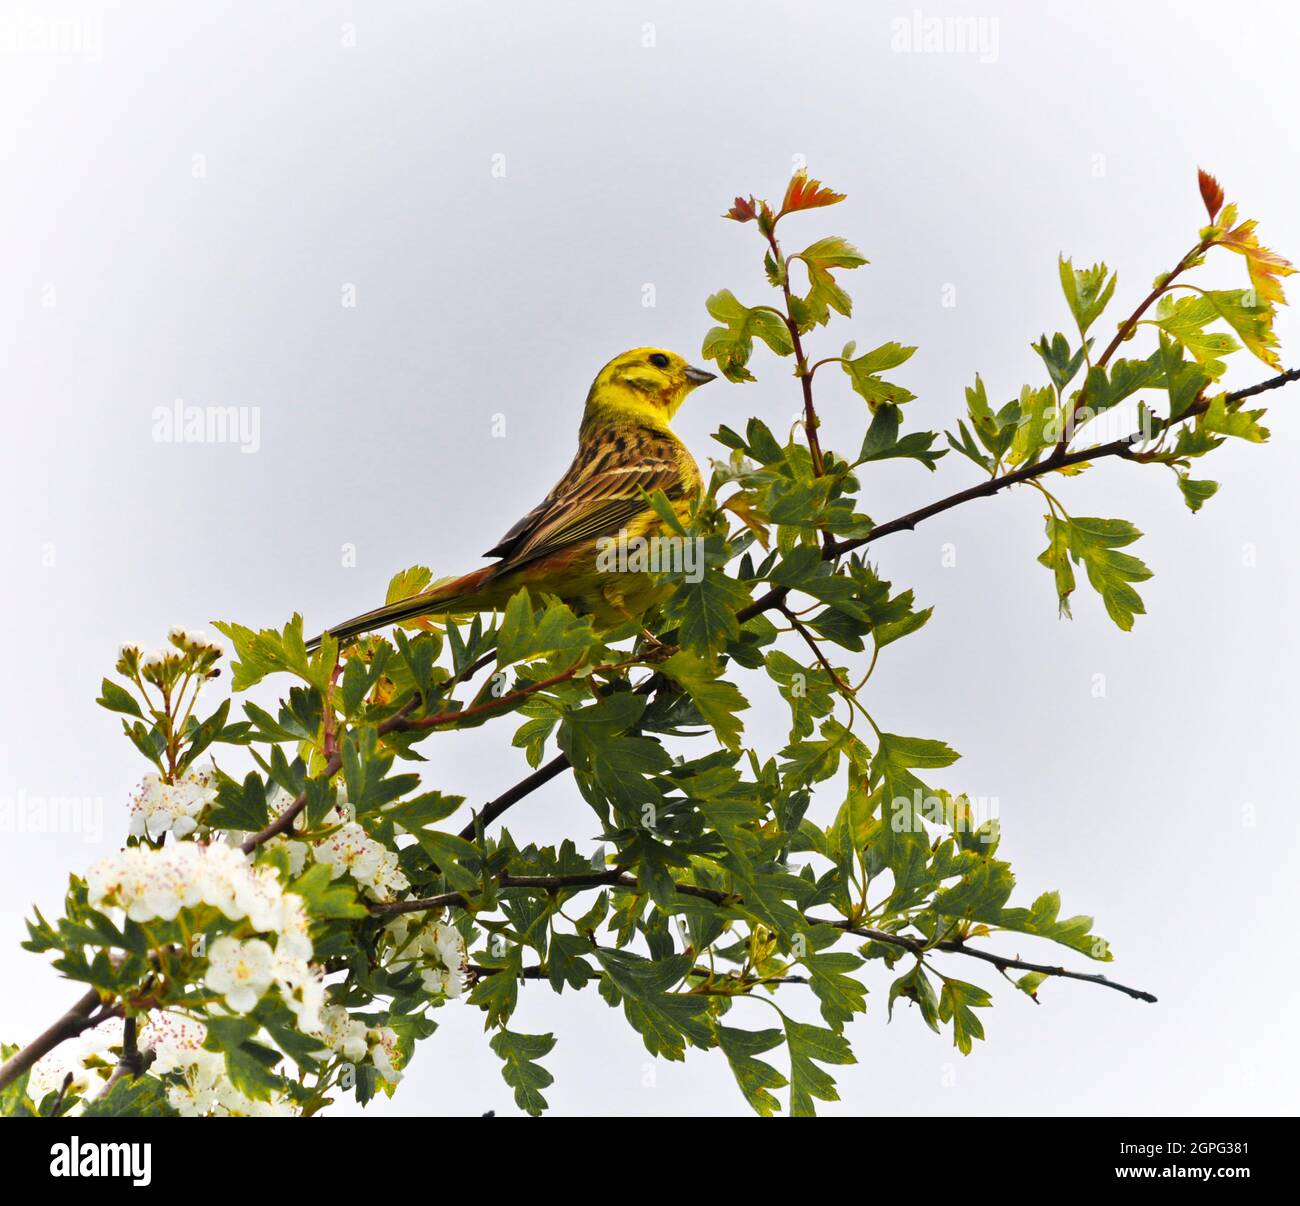 Oiseau Yellowhammer - Emberiza citrinella assis à hedgerow Banque D'Images